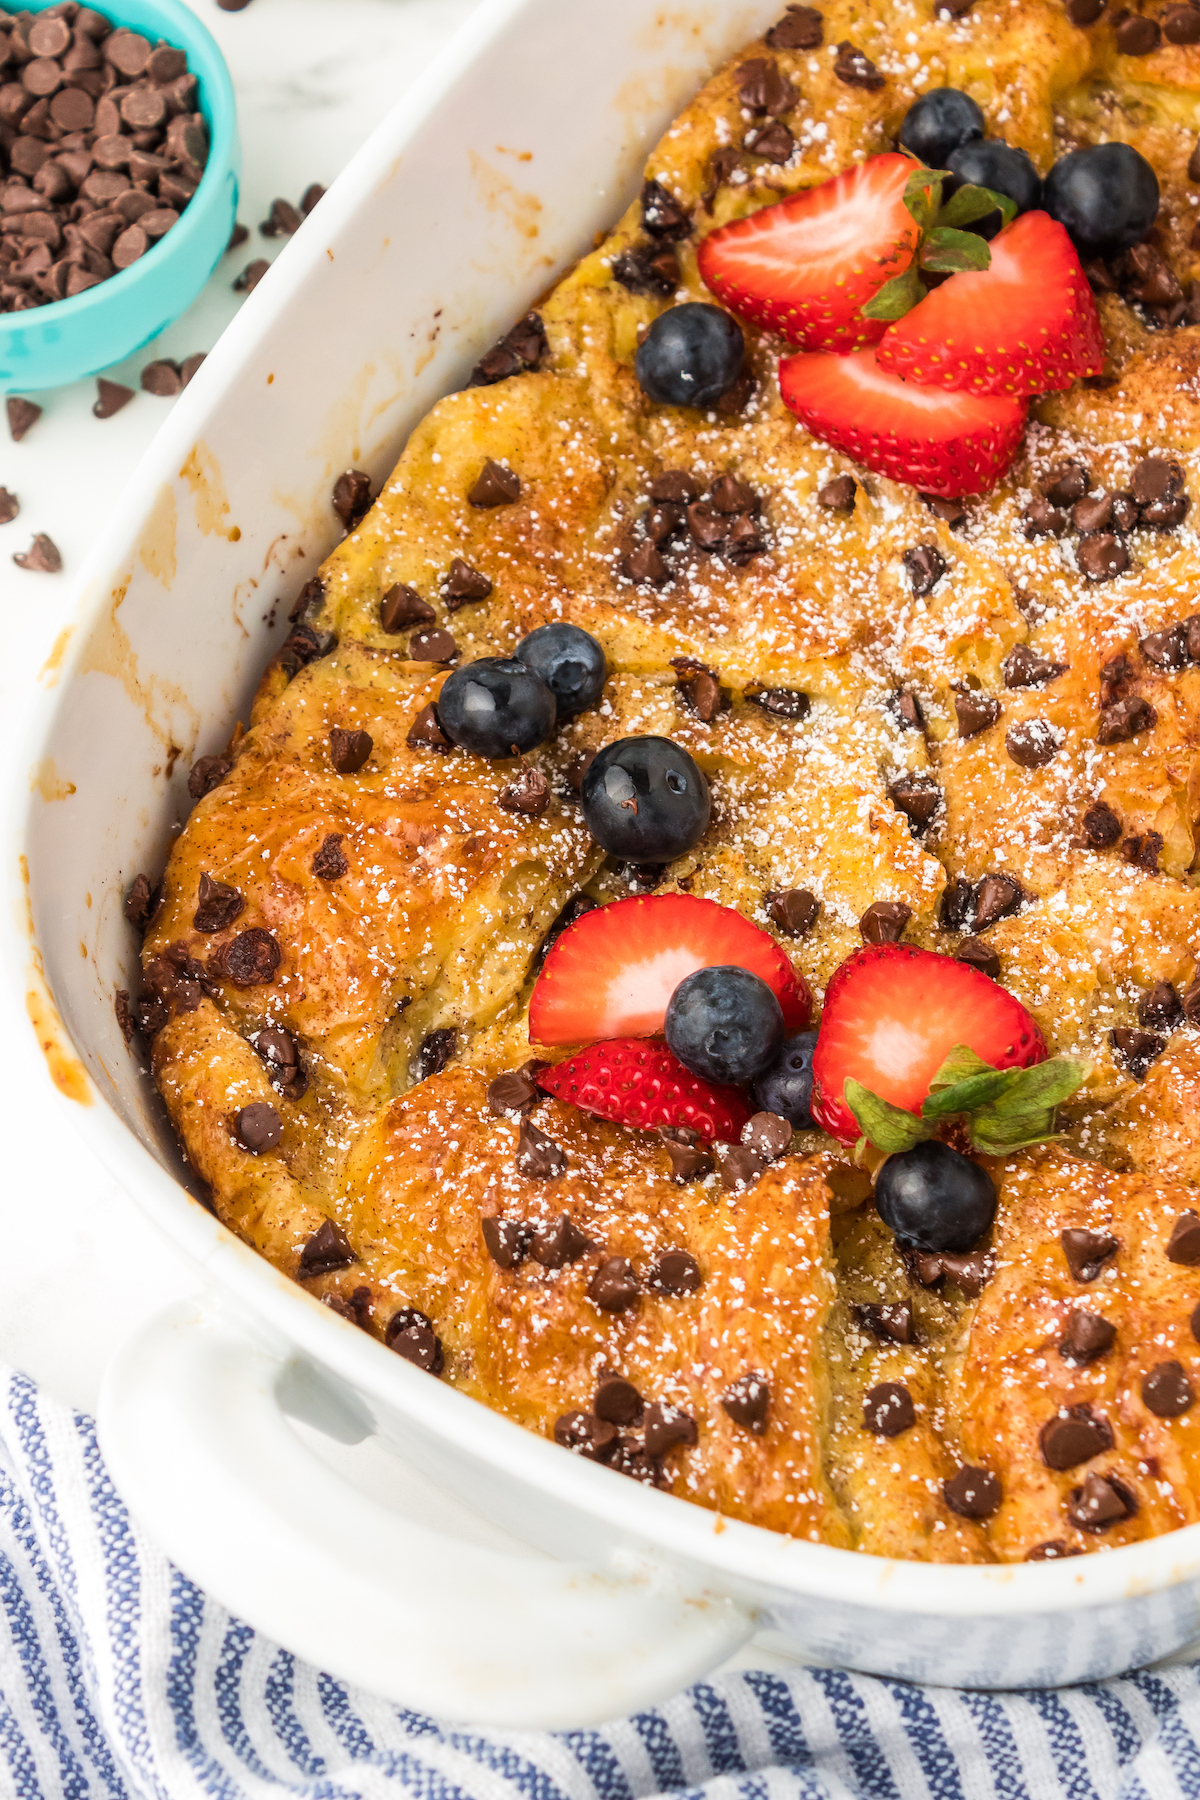 Chocolate chip croissant French toast bake in a baking dish with strawberries and blueberries on top.